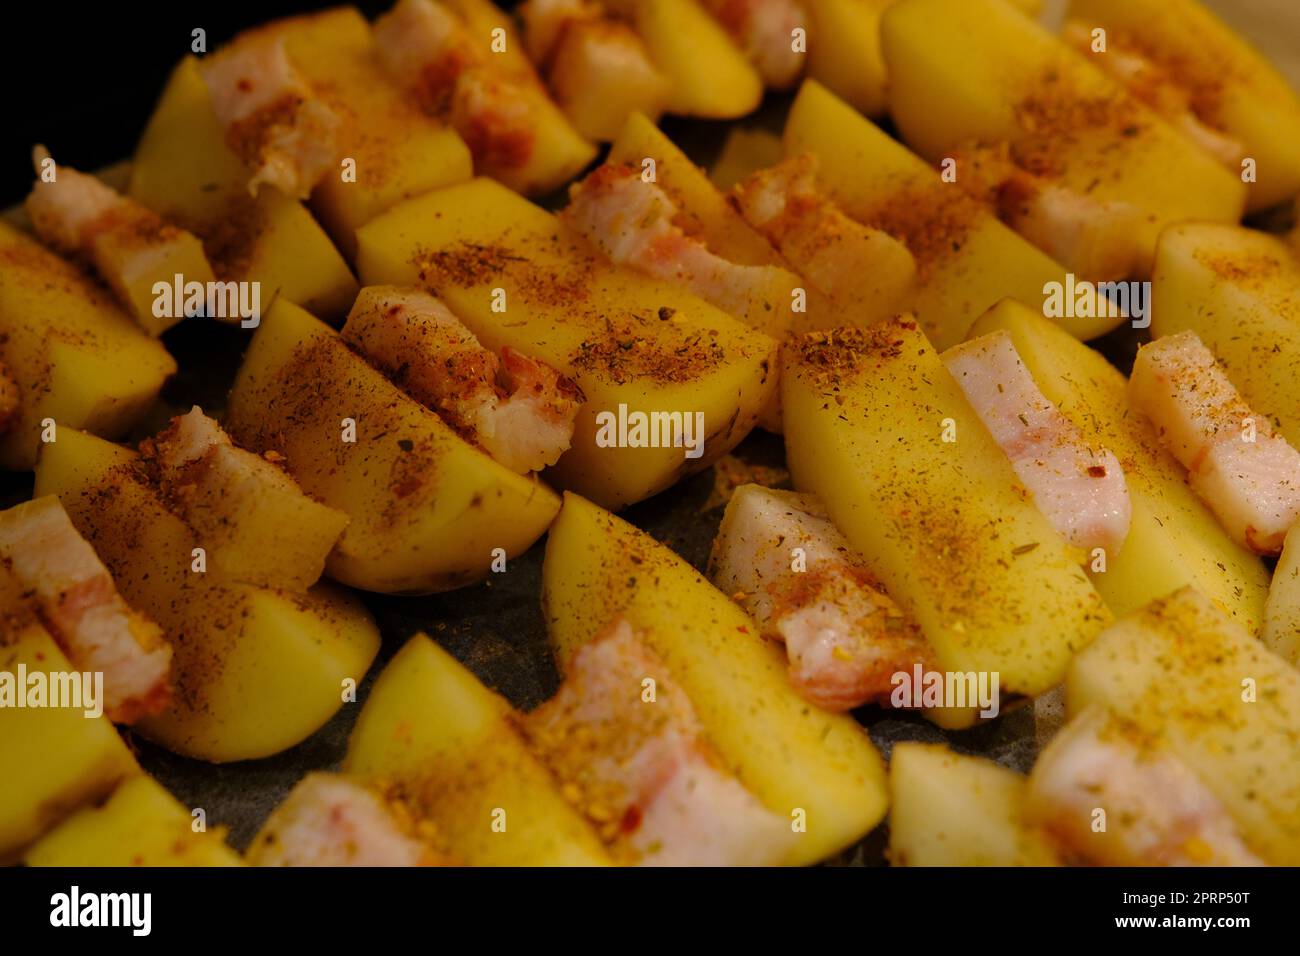 Delicious Potato Bratkartoffeln With Bacon close up in the plate on ready to bake Stock Photo